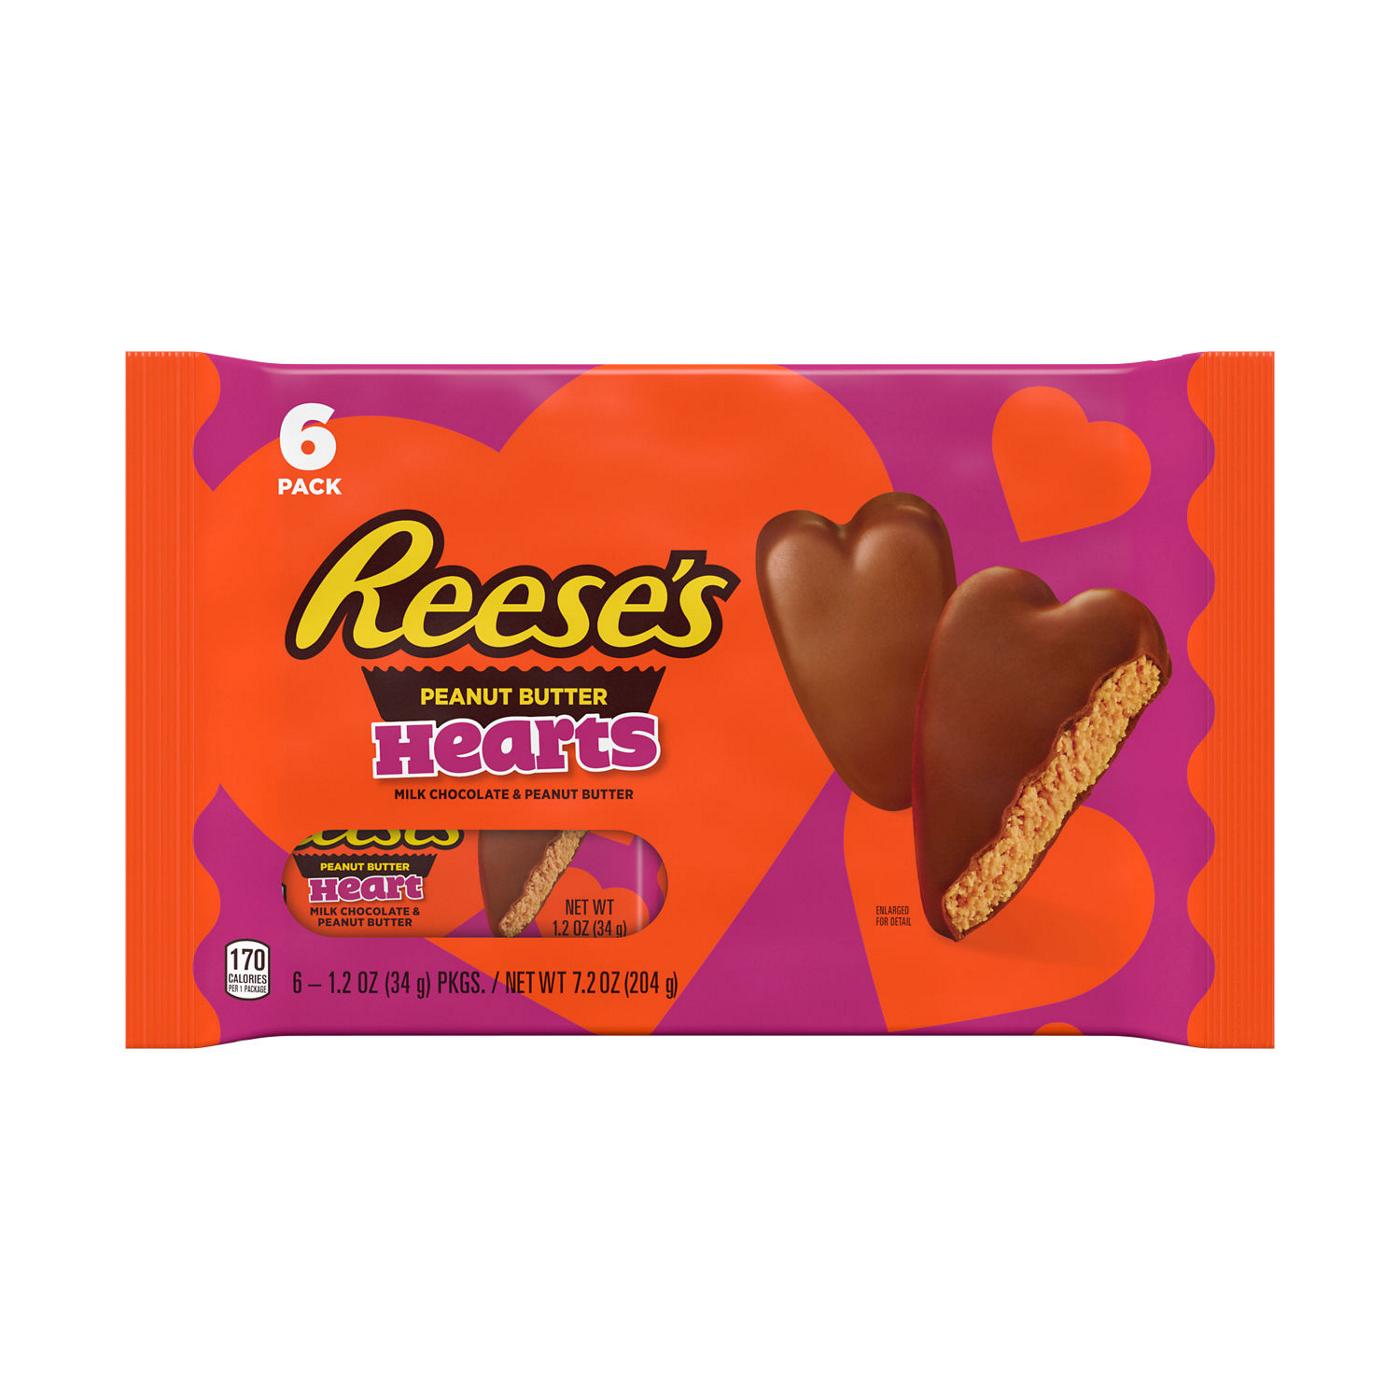 Reese's Peanut Butter Hearts Valentine's Candy; image 1 of 8